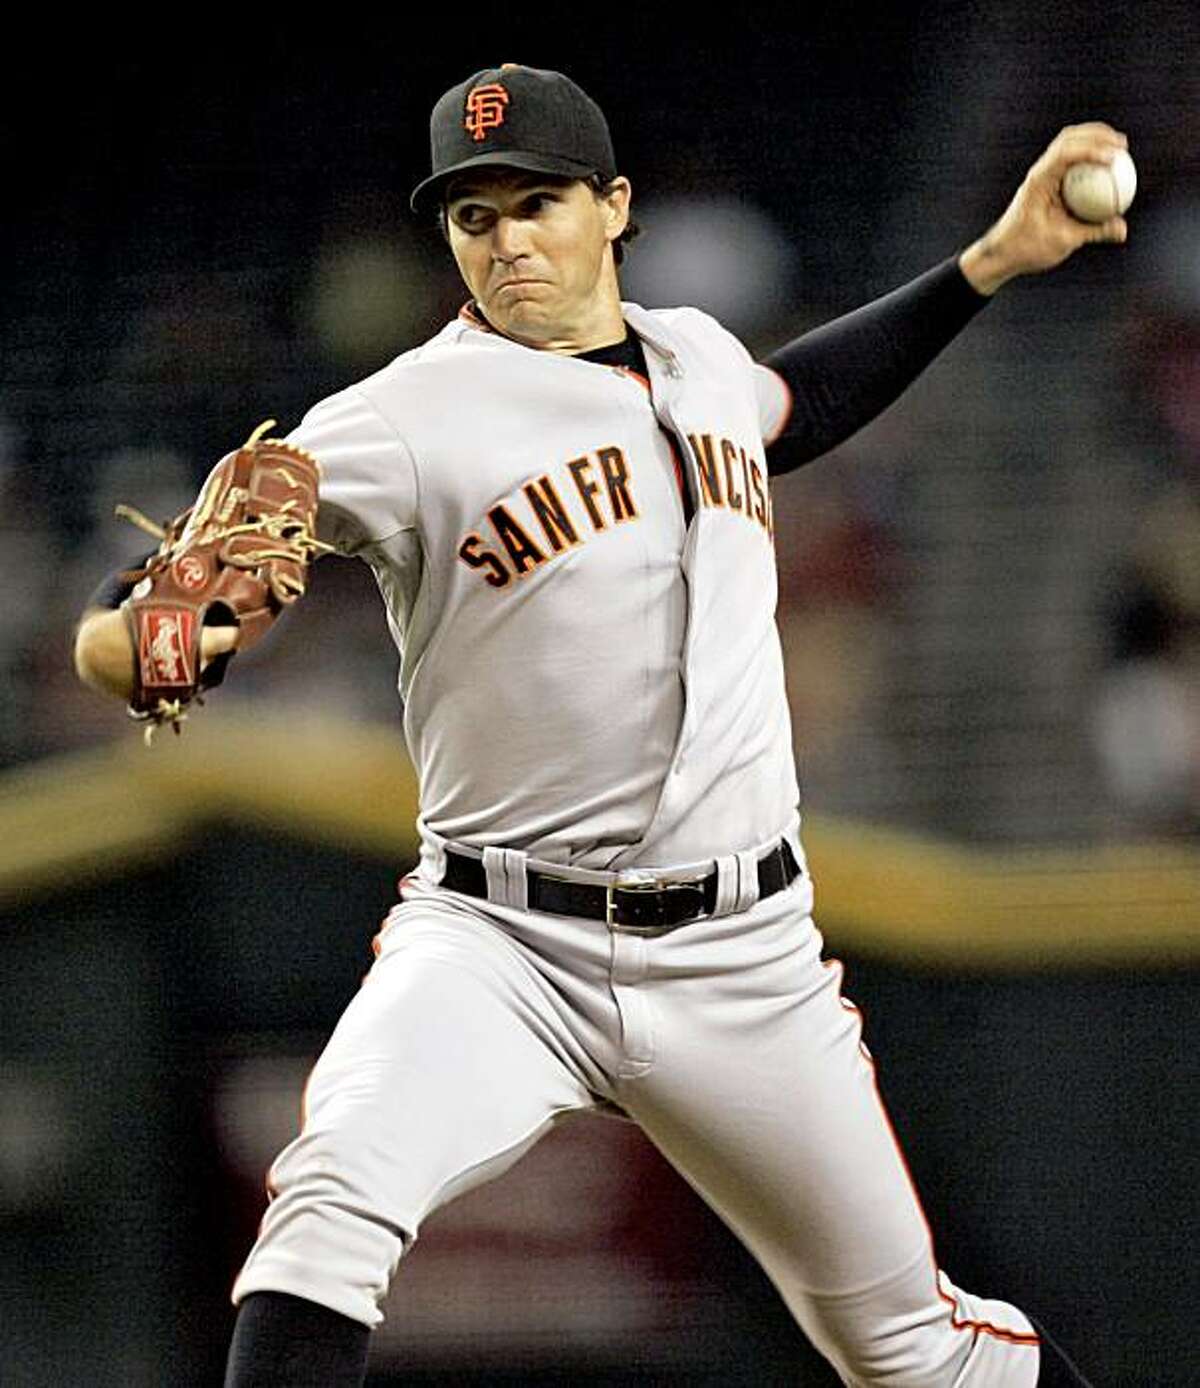 San Francisco Giants pitcher Barry Zito delivers against the Arizona Diamondbacks during the first inning of a baseball game Monday, Sept. 21, 2009, in Phoenix.